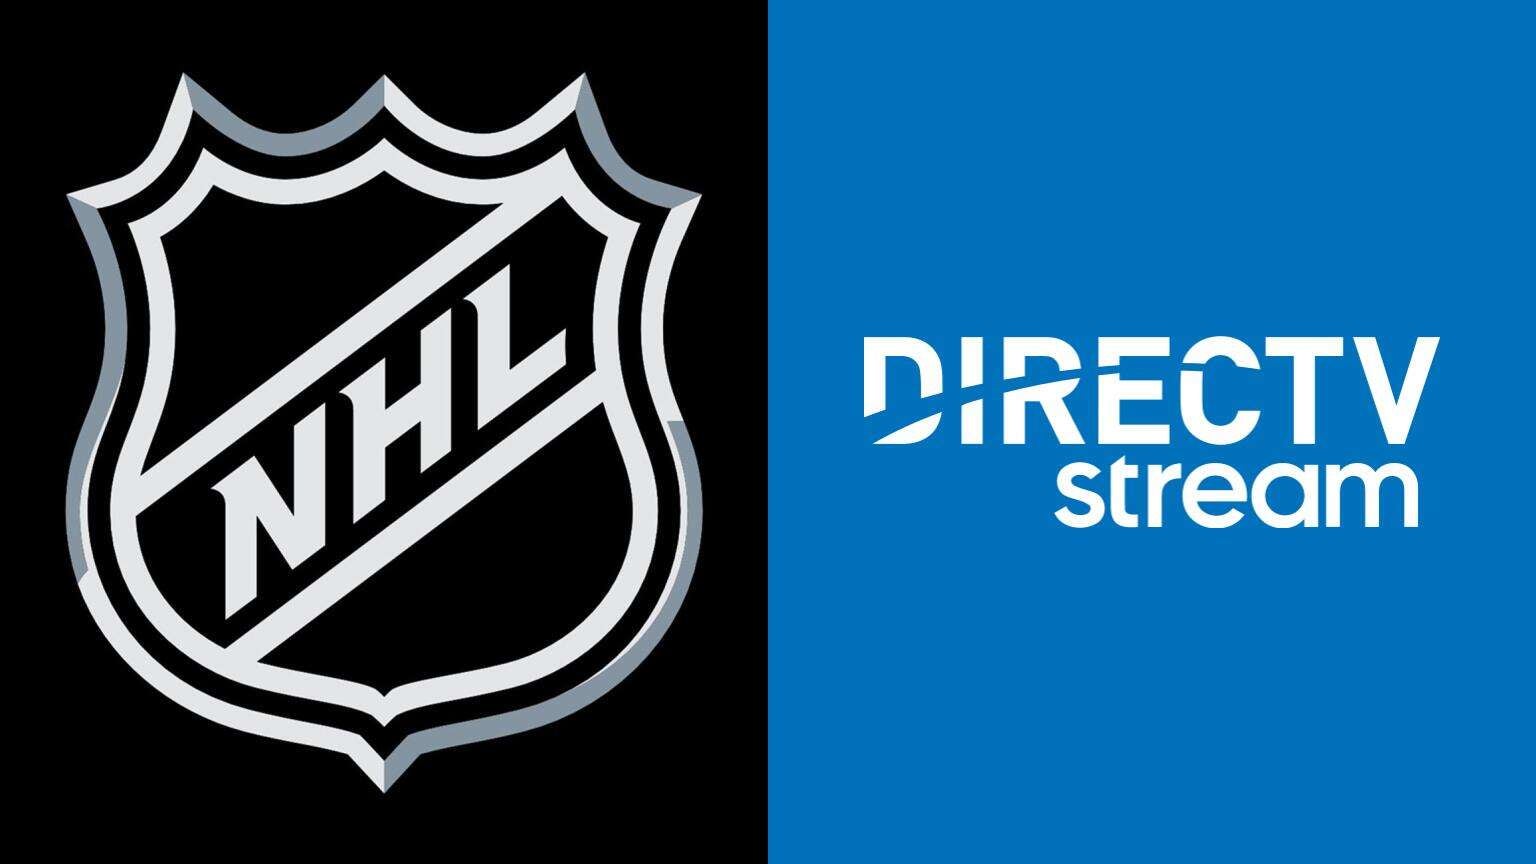 What channel is the penguins game on directv information